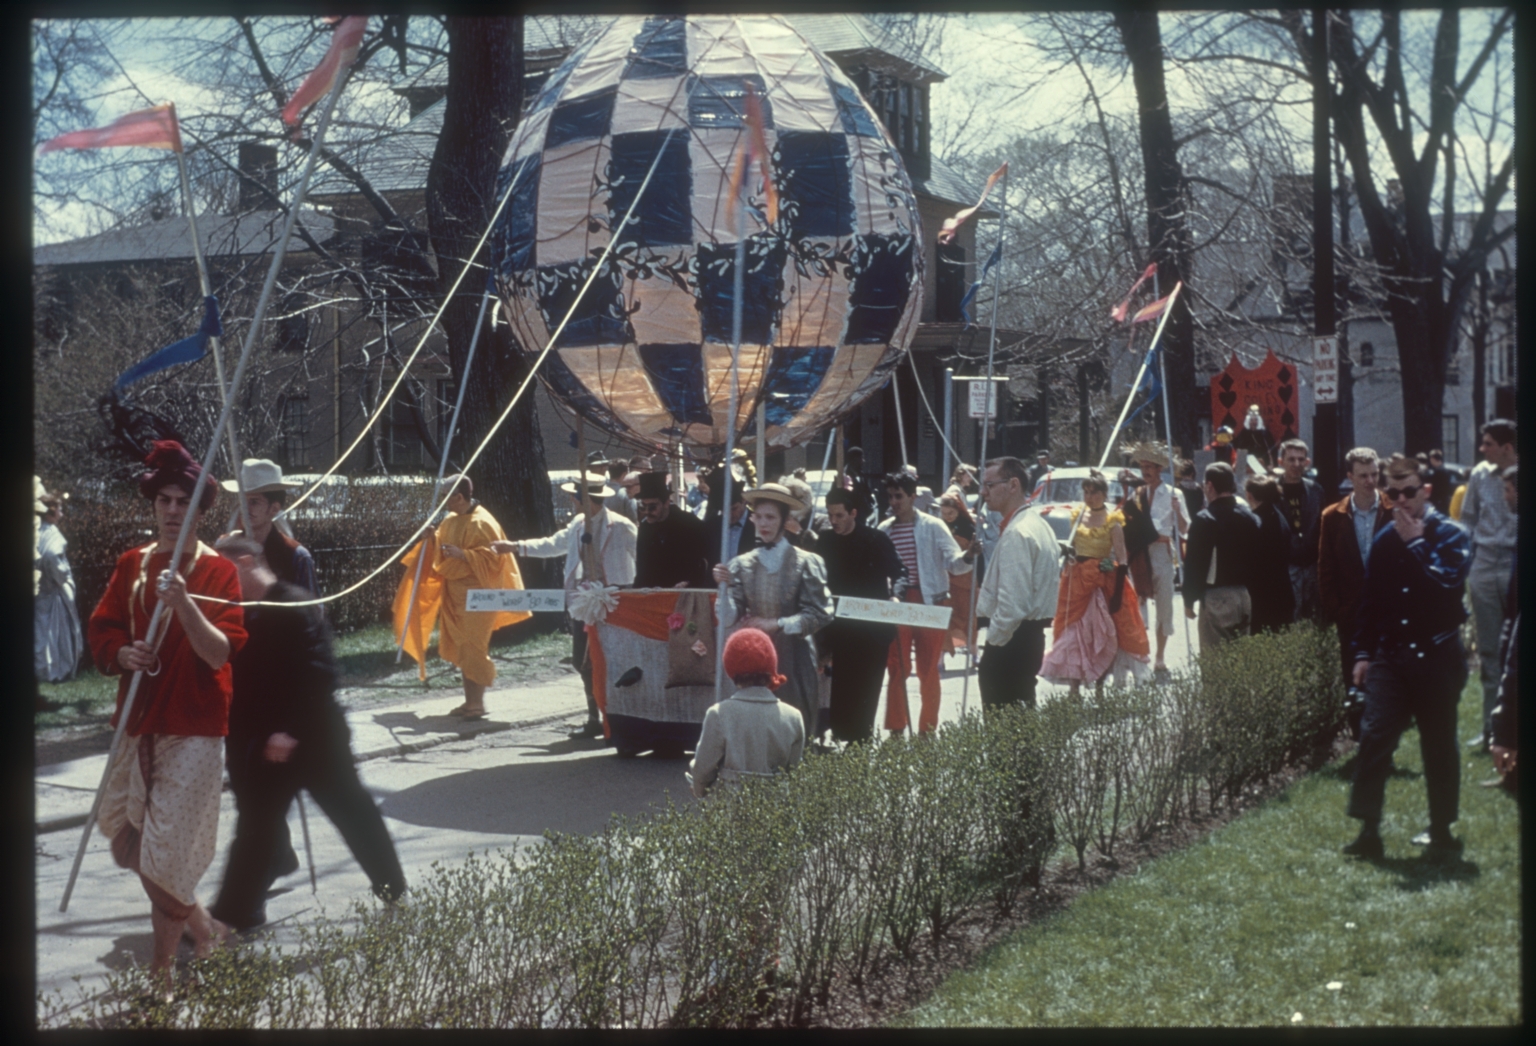 Spring weekend parade float in the theme of Spring Bookend," 1963 [slide]."